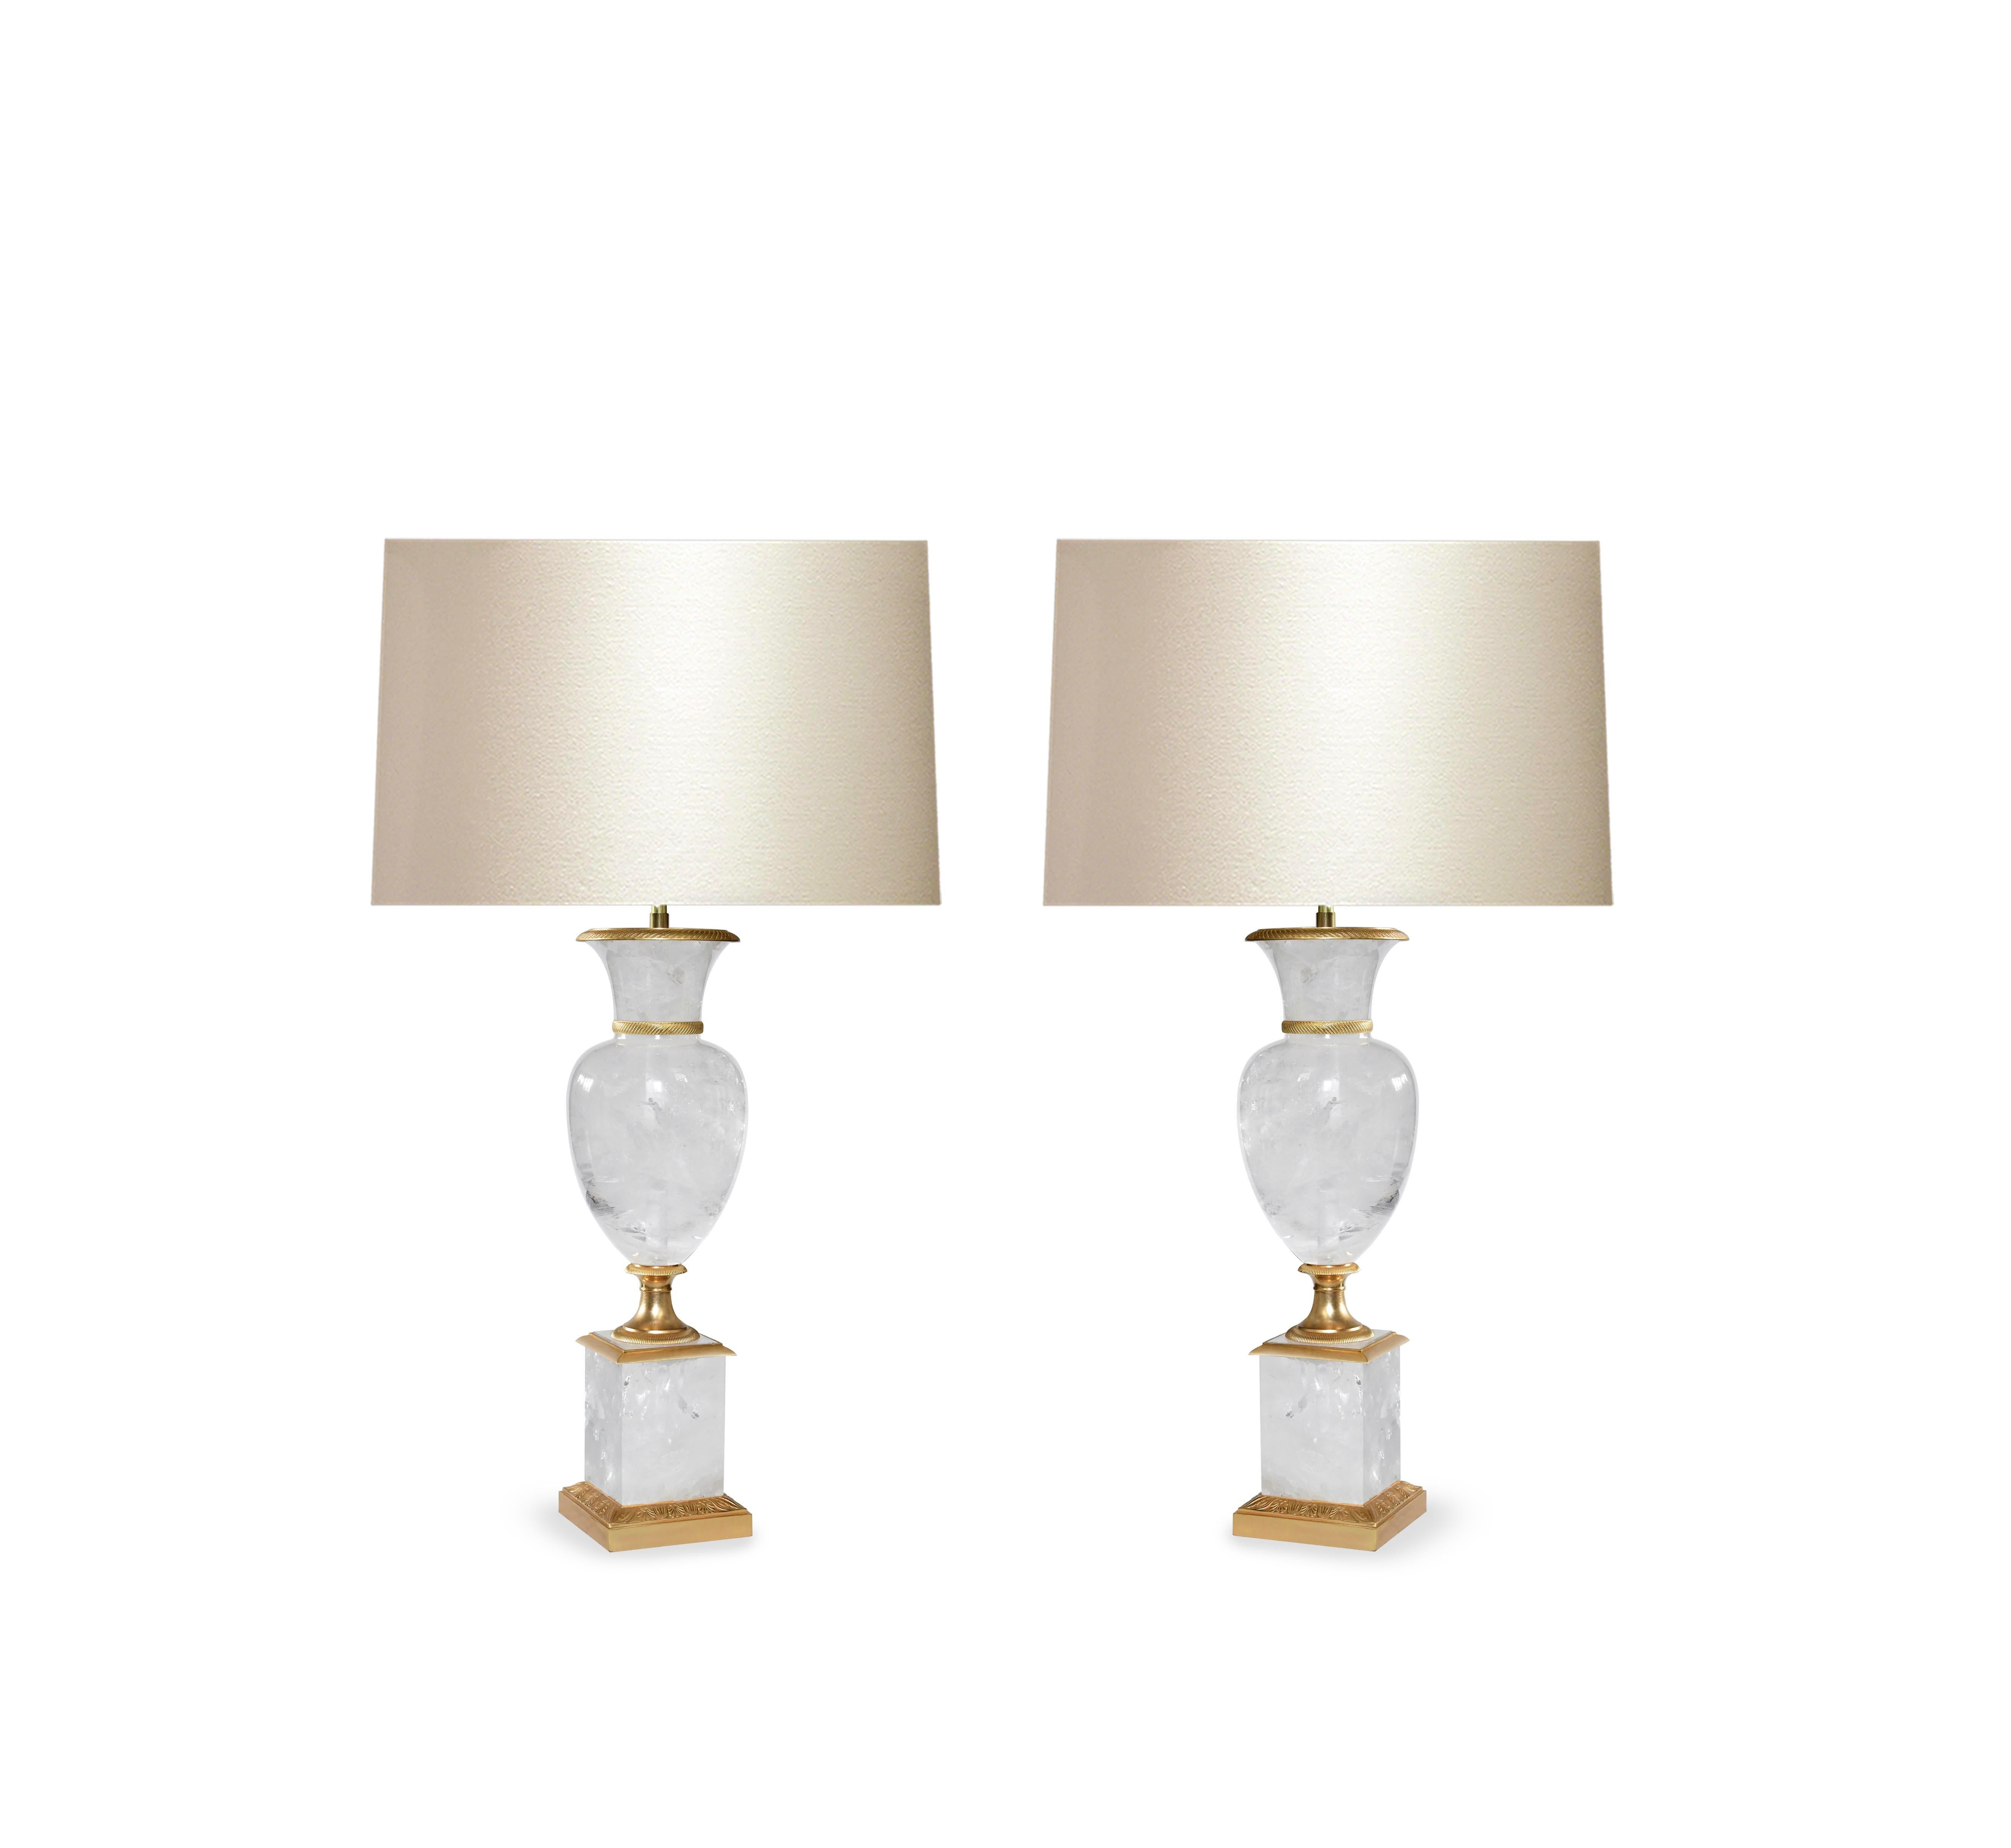 Pair of classic style ormolu-mounted rock crystal lamps. Created by Phoenix Gallery, NYC.
Available in nickel plating and antique brass finishes.
To the top of rock crystal: 20 inch.
(Lampshade not included).